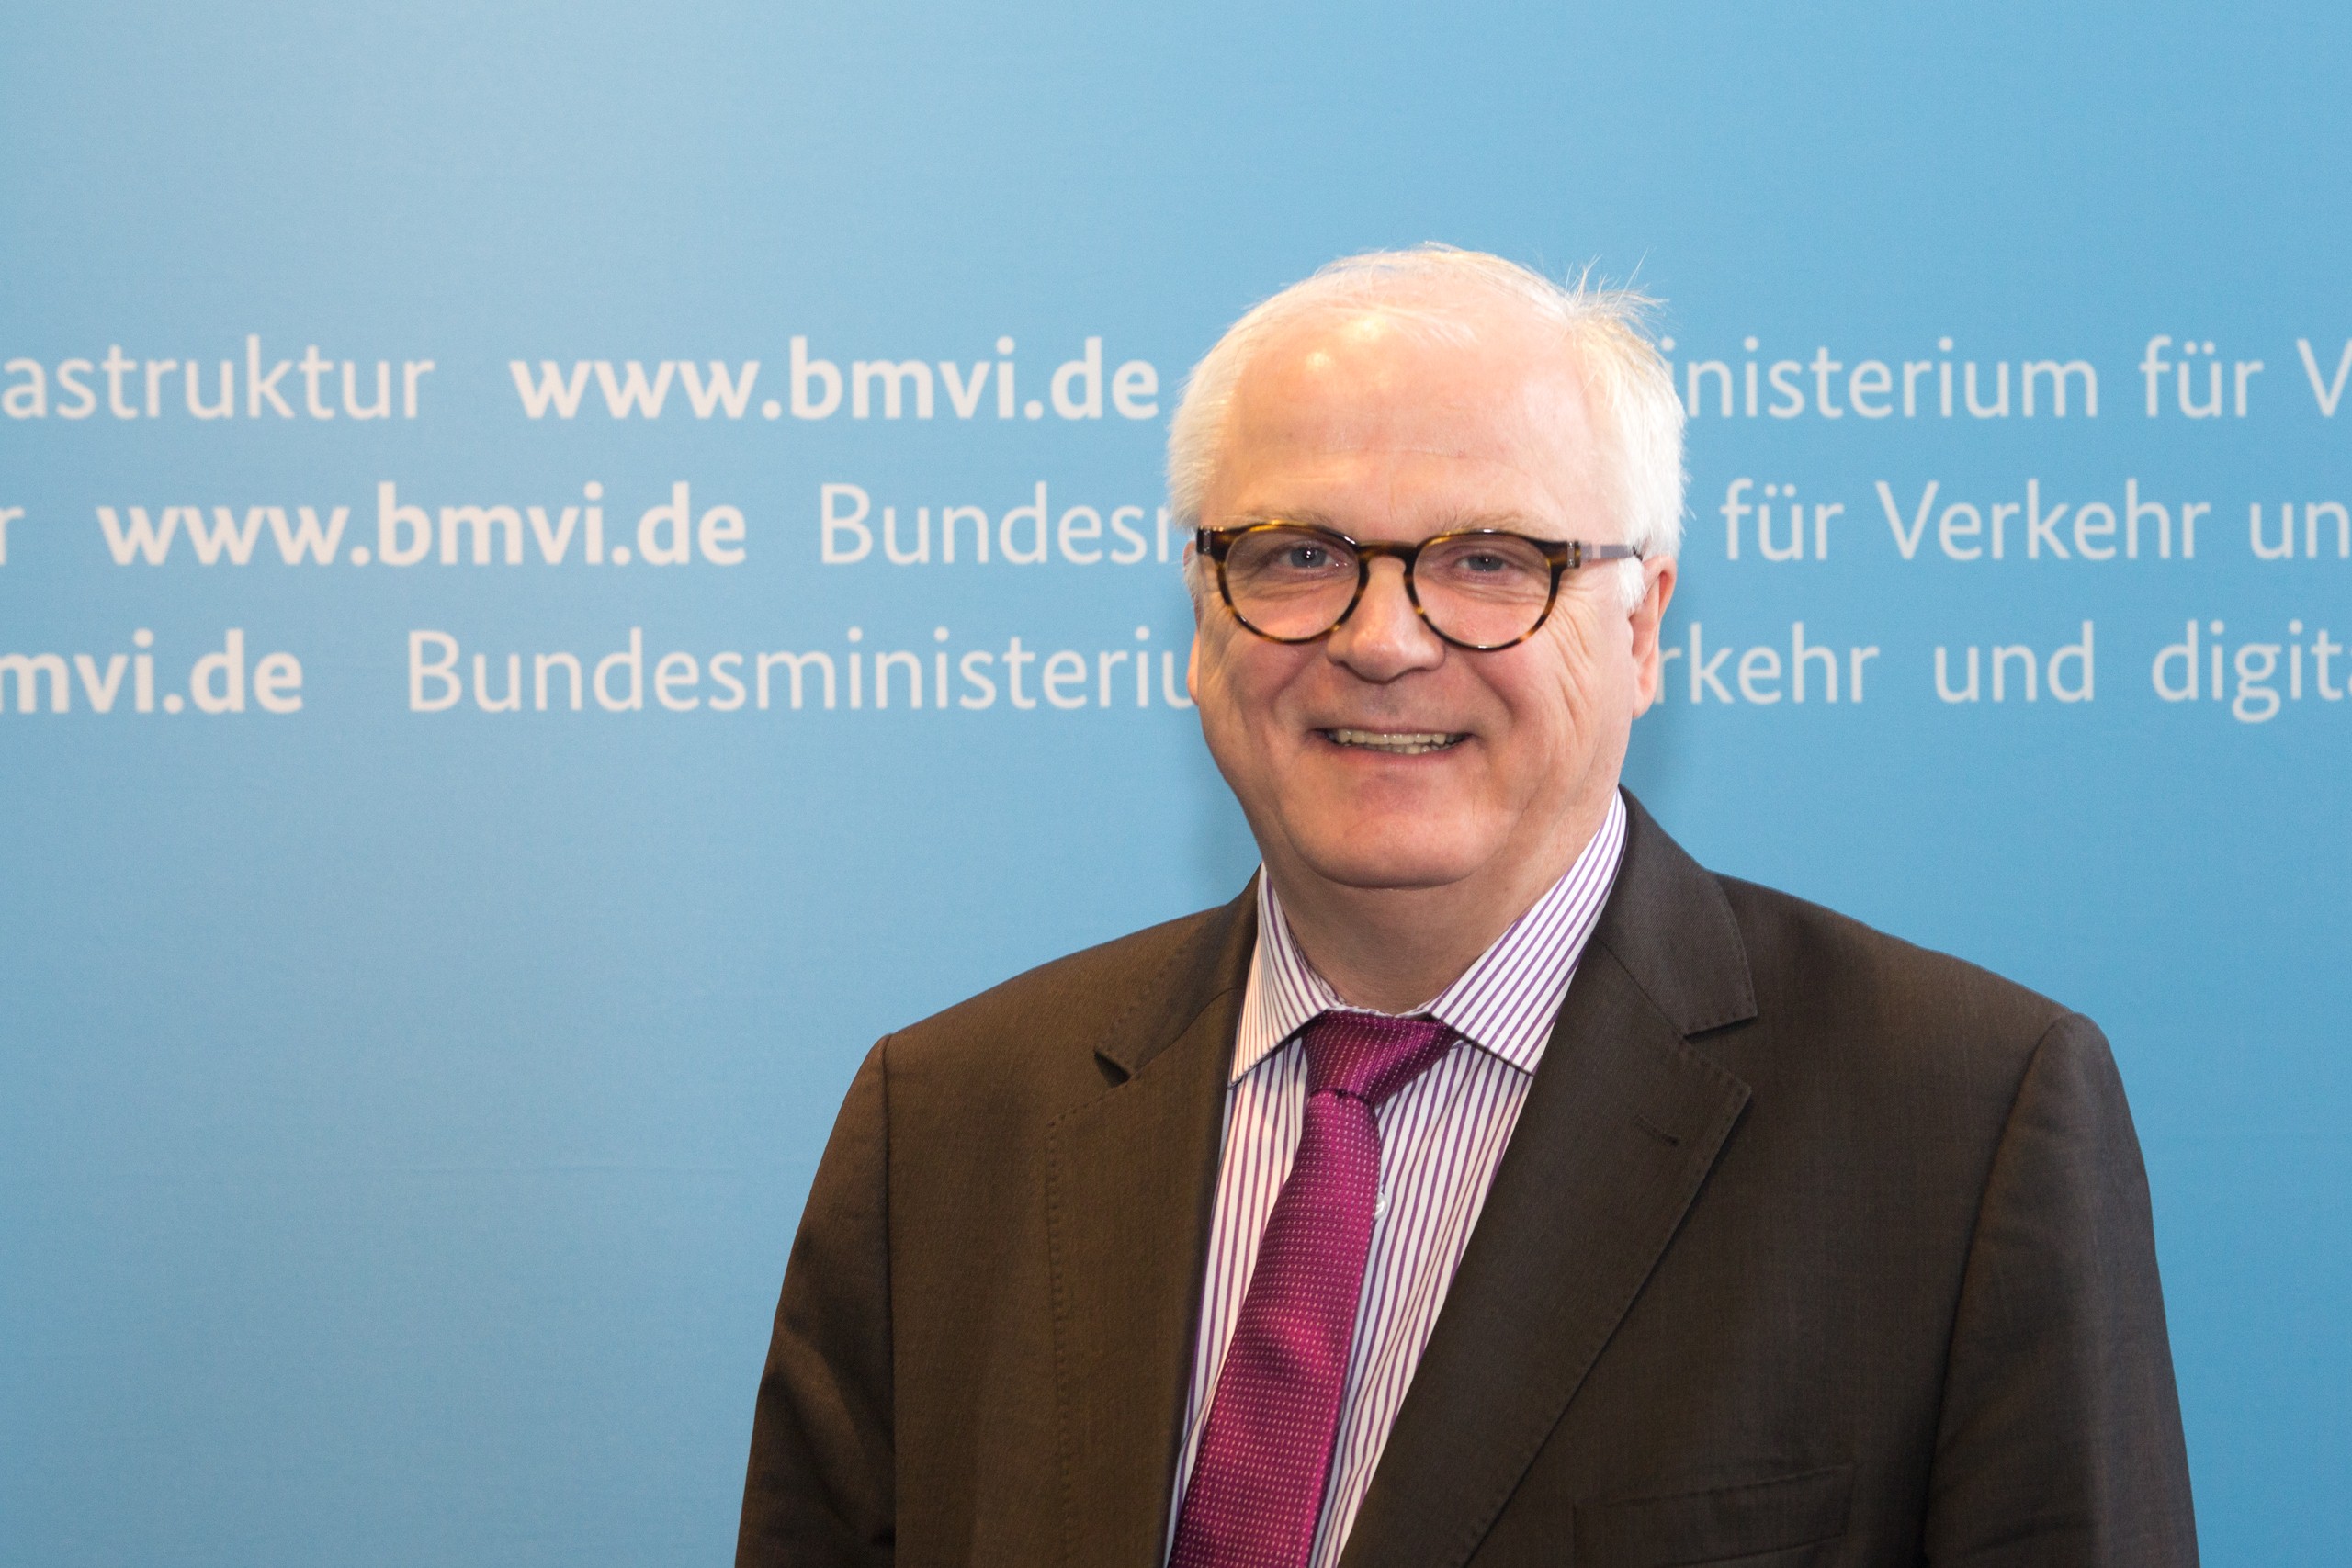 Director-General for Waterways and Shipping (BMVI), Federal Republic of Germany